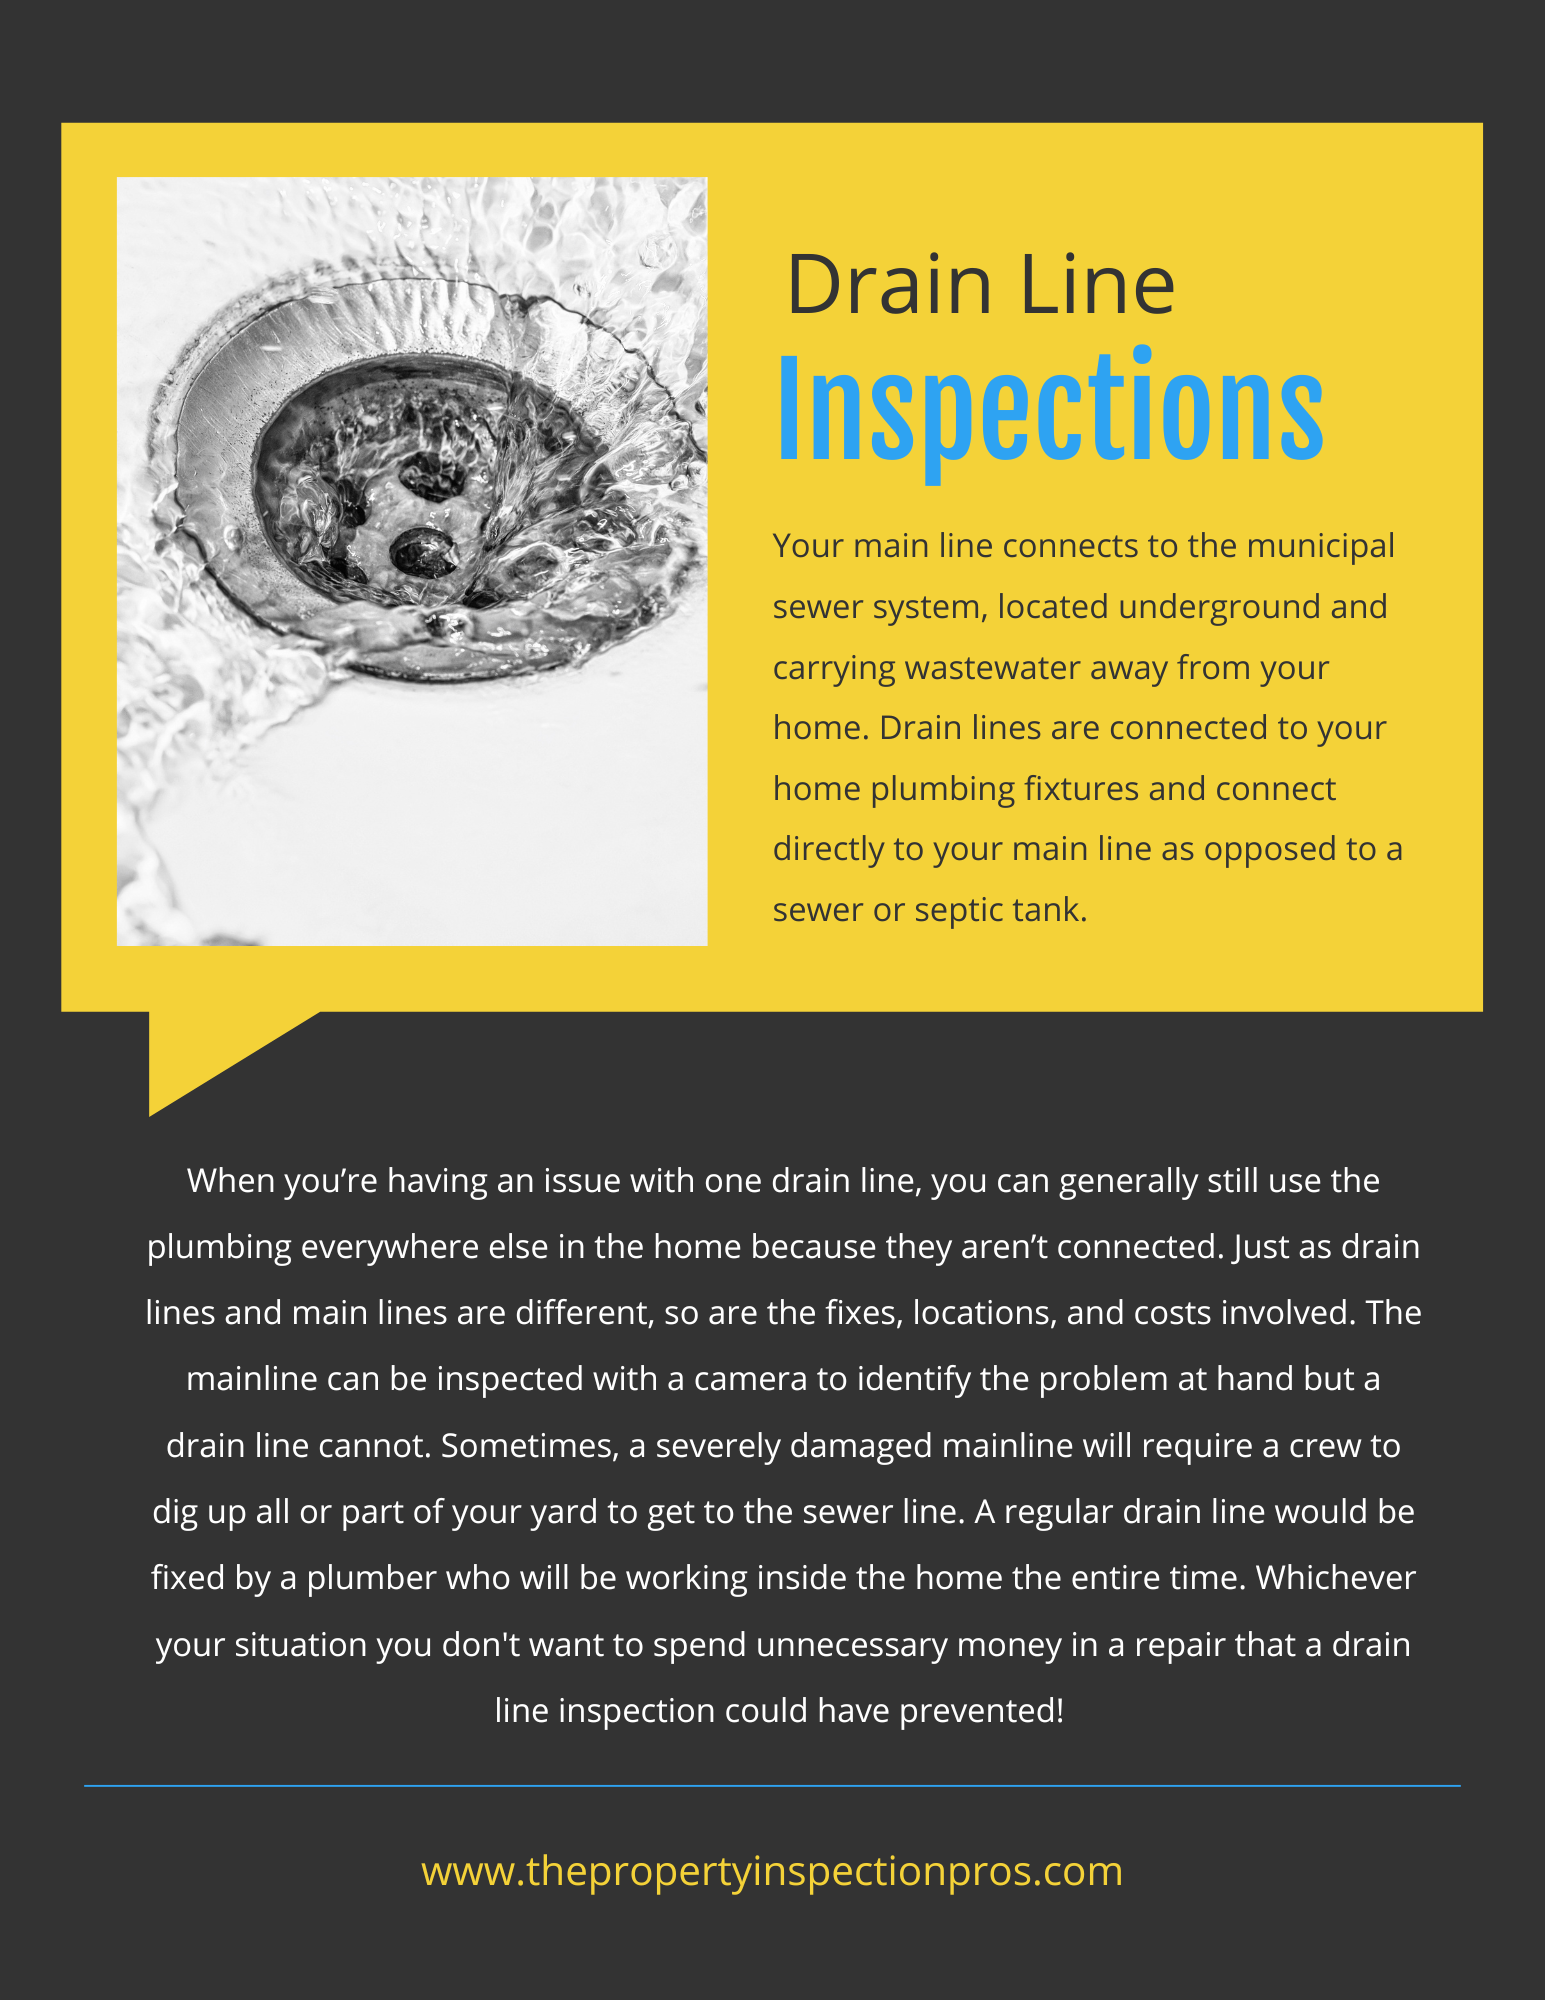 Drain Line Inspections